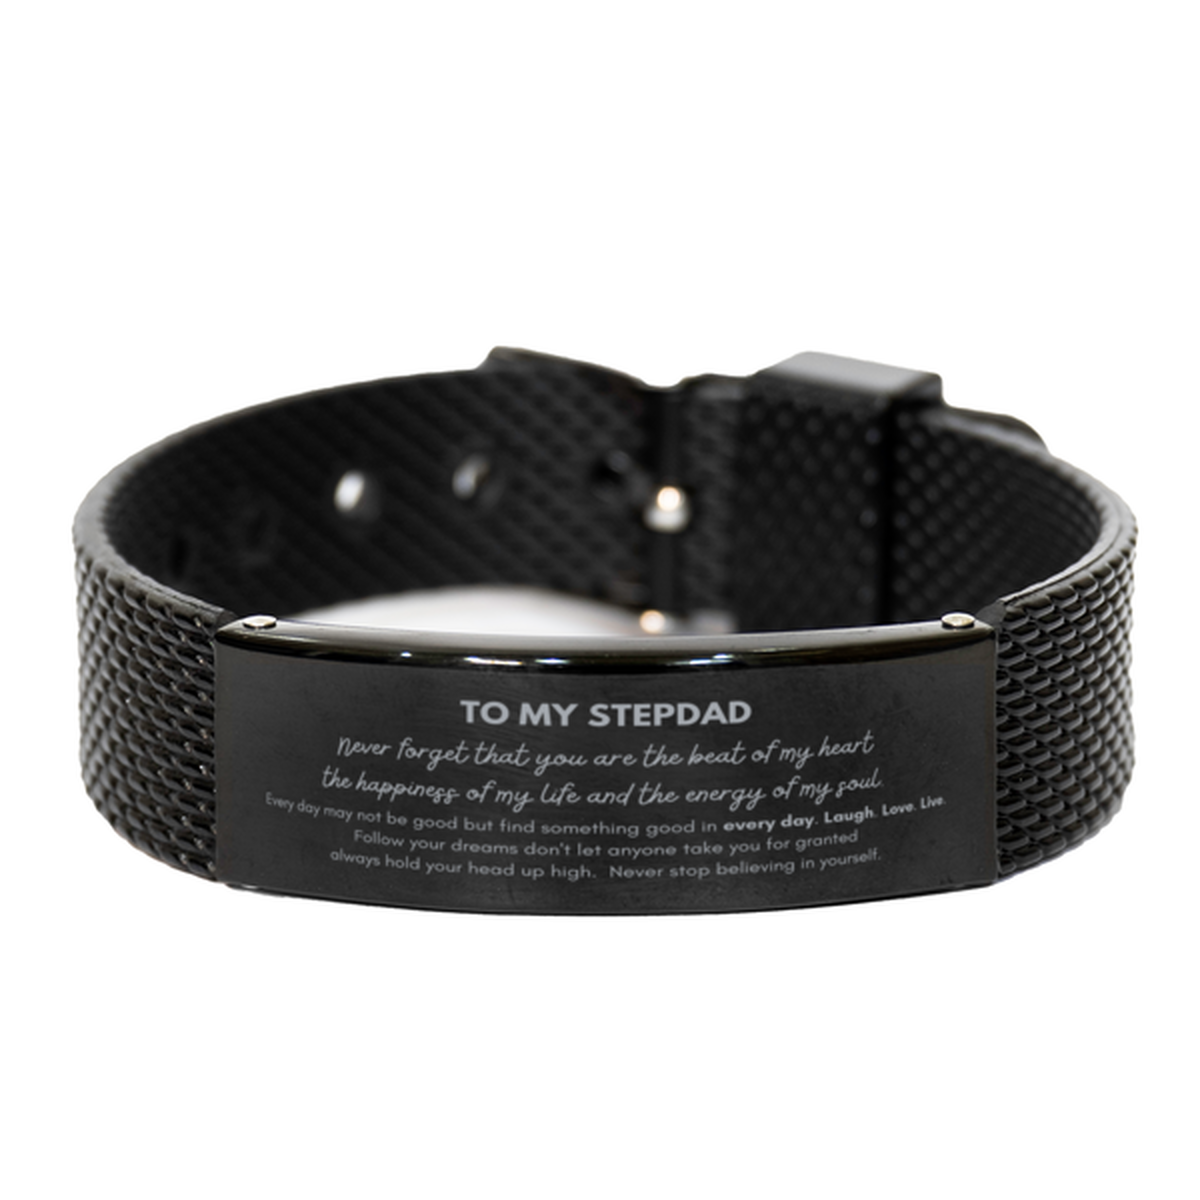 To My Stepdad Bracelet Gifts, Christmas Stepdad Black Shark Mesh Bracelet Present, Birthday Unique Motivational For Stepdad, To My Stepdad Never forget that you are the beat of my heart the happiness of my life and the energy of my soul